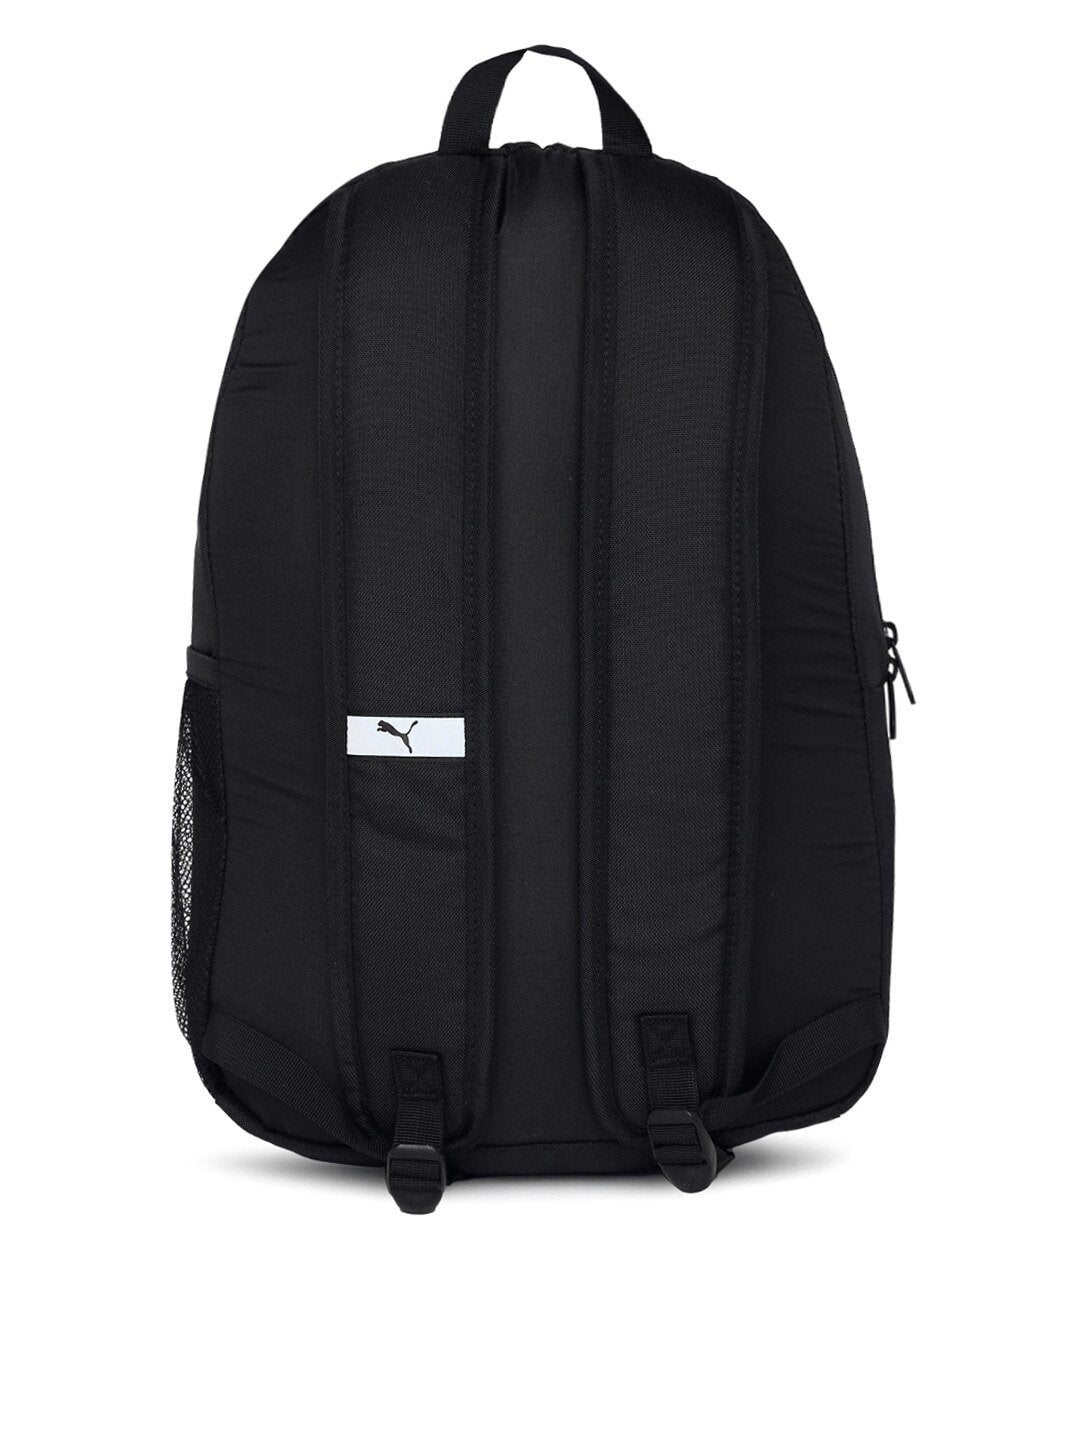 Unisex Black Phase Laptop Backpack - Discount Store